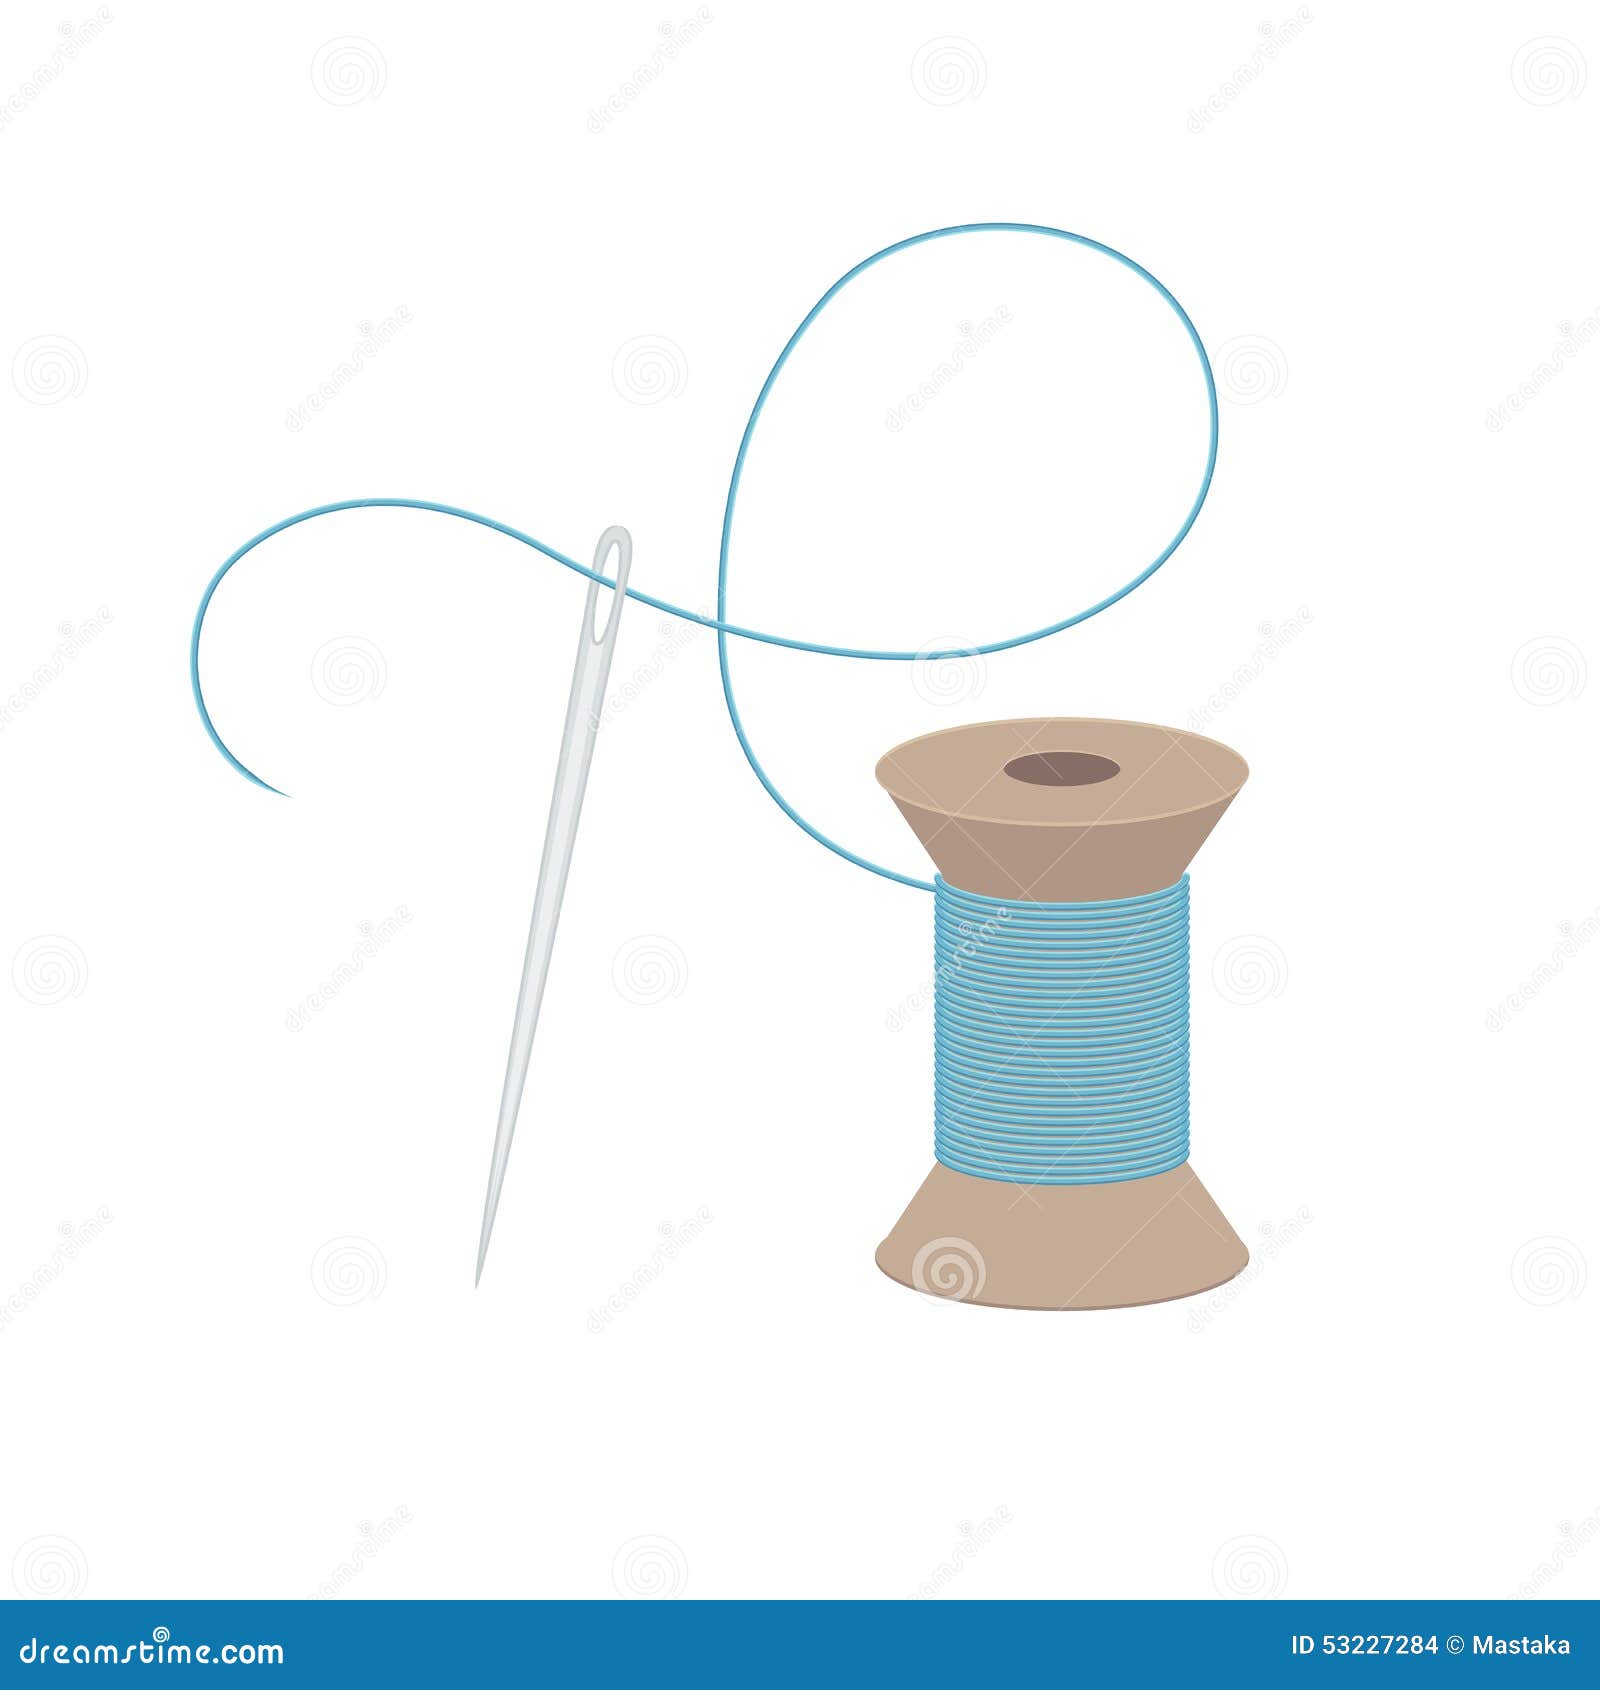 Needle and Thread stock vector. Illustration of blue - 53227284